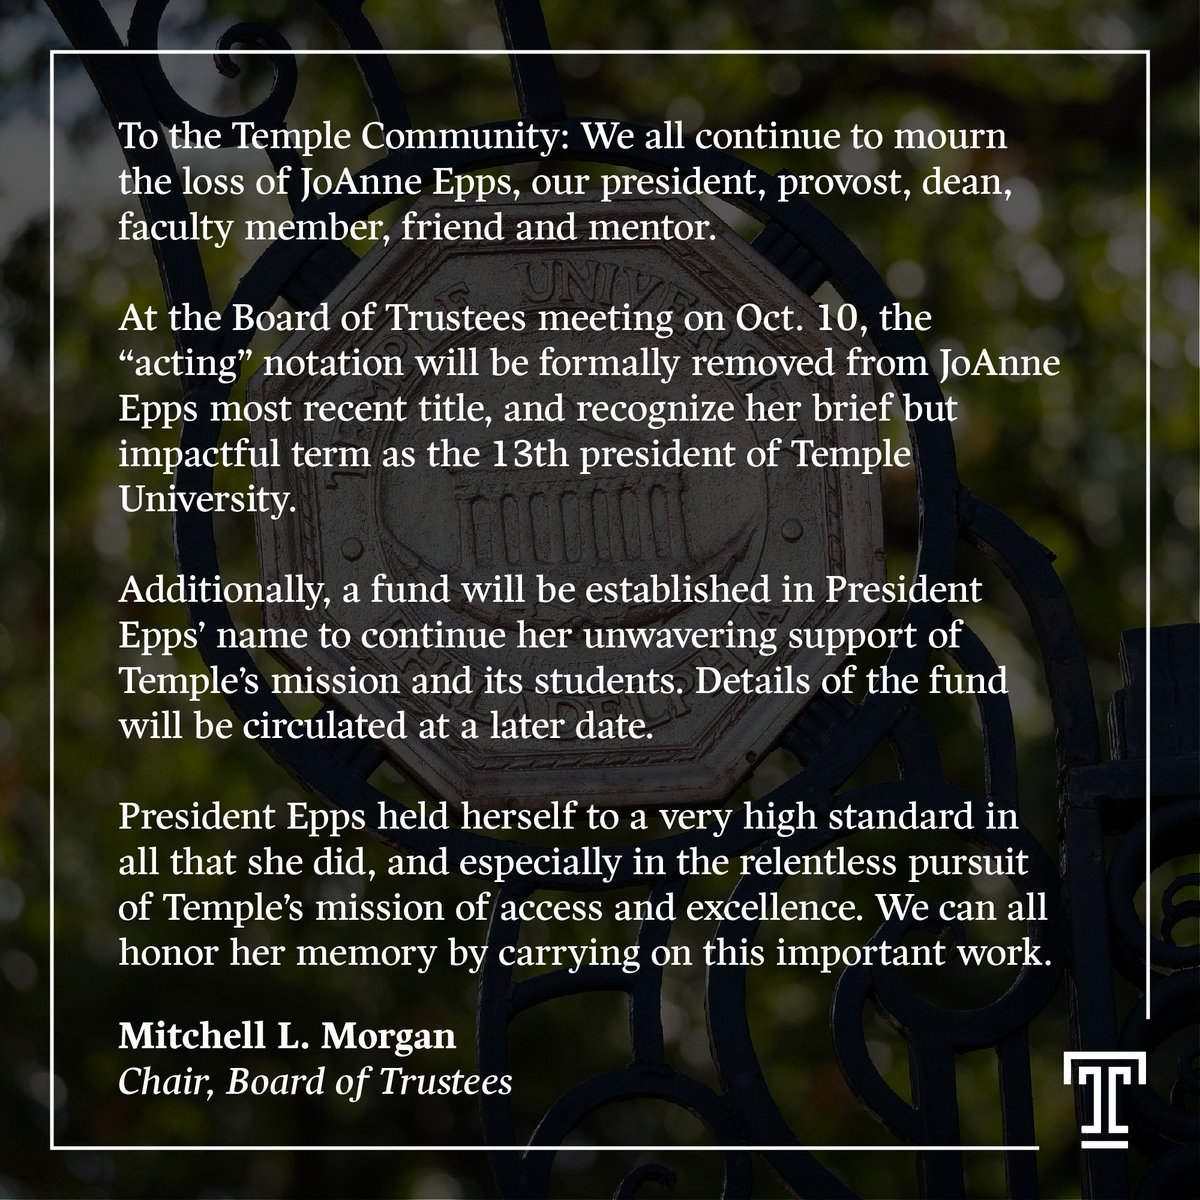 A message to the Temple Community from Mitchell L. Morgan, chair of the Board of Trustees.